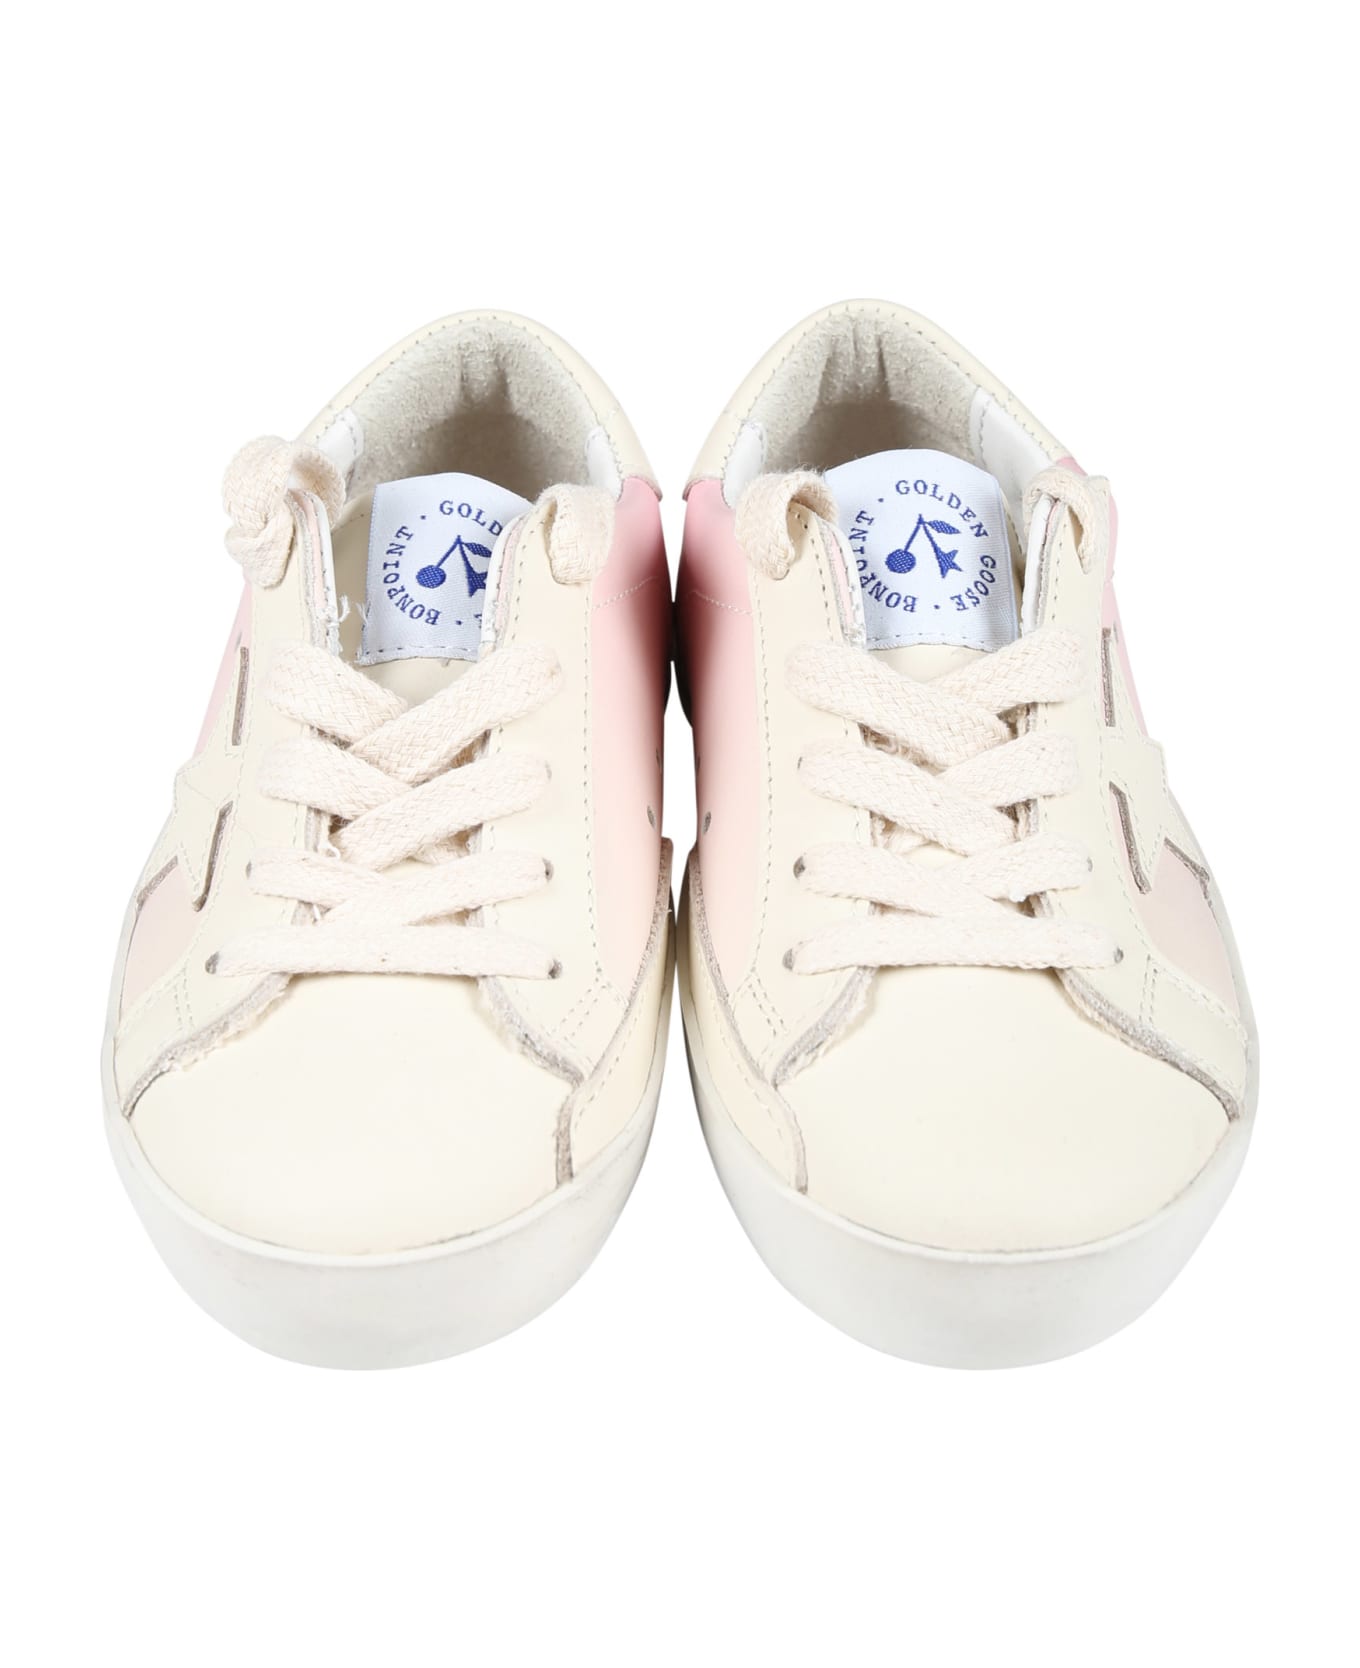 Bonpoint Pink Sneakers For Girl With Star - Pink